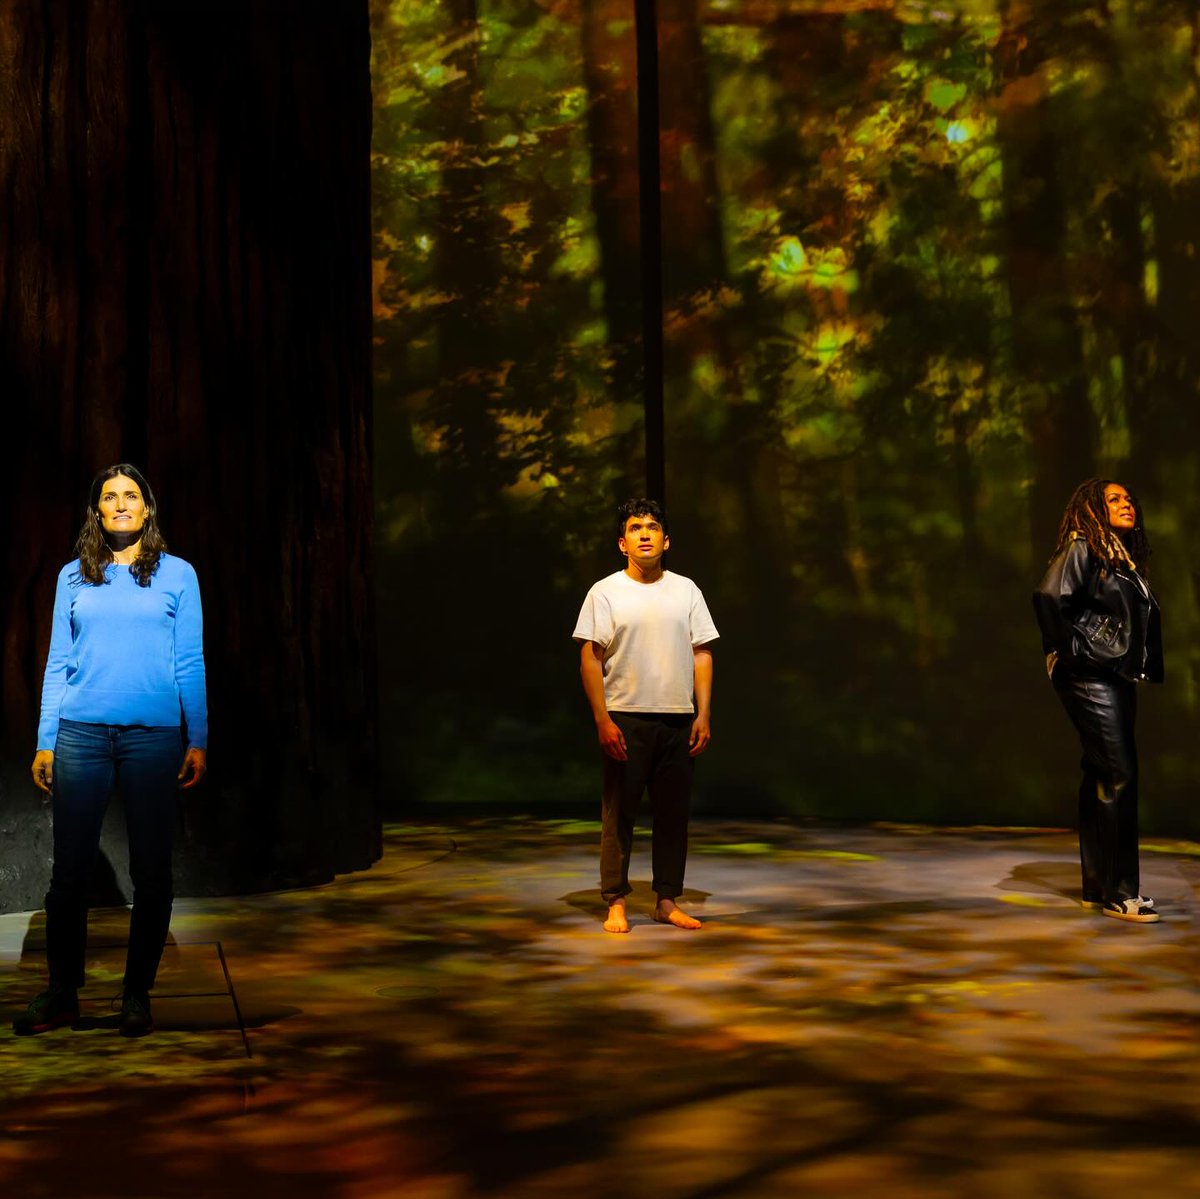 Happy Trails, Redwood! The show ended its run a La Jolla Playhouse yesterday. Now we cross our fingers/pray/manifest/insert your personal belief here that it makes its way to Broadway! 💚🌳